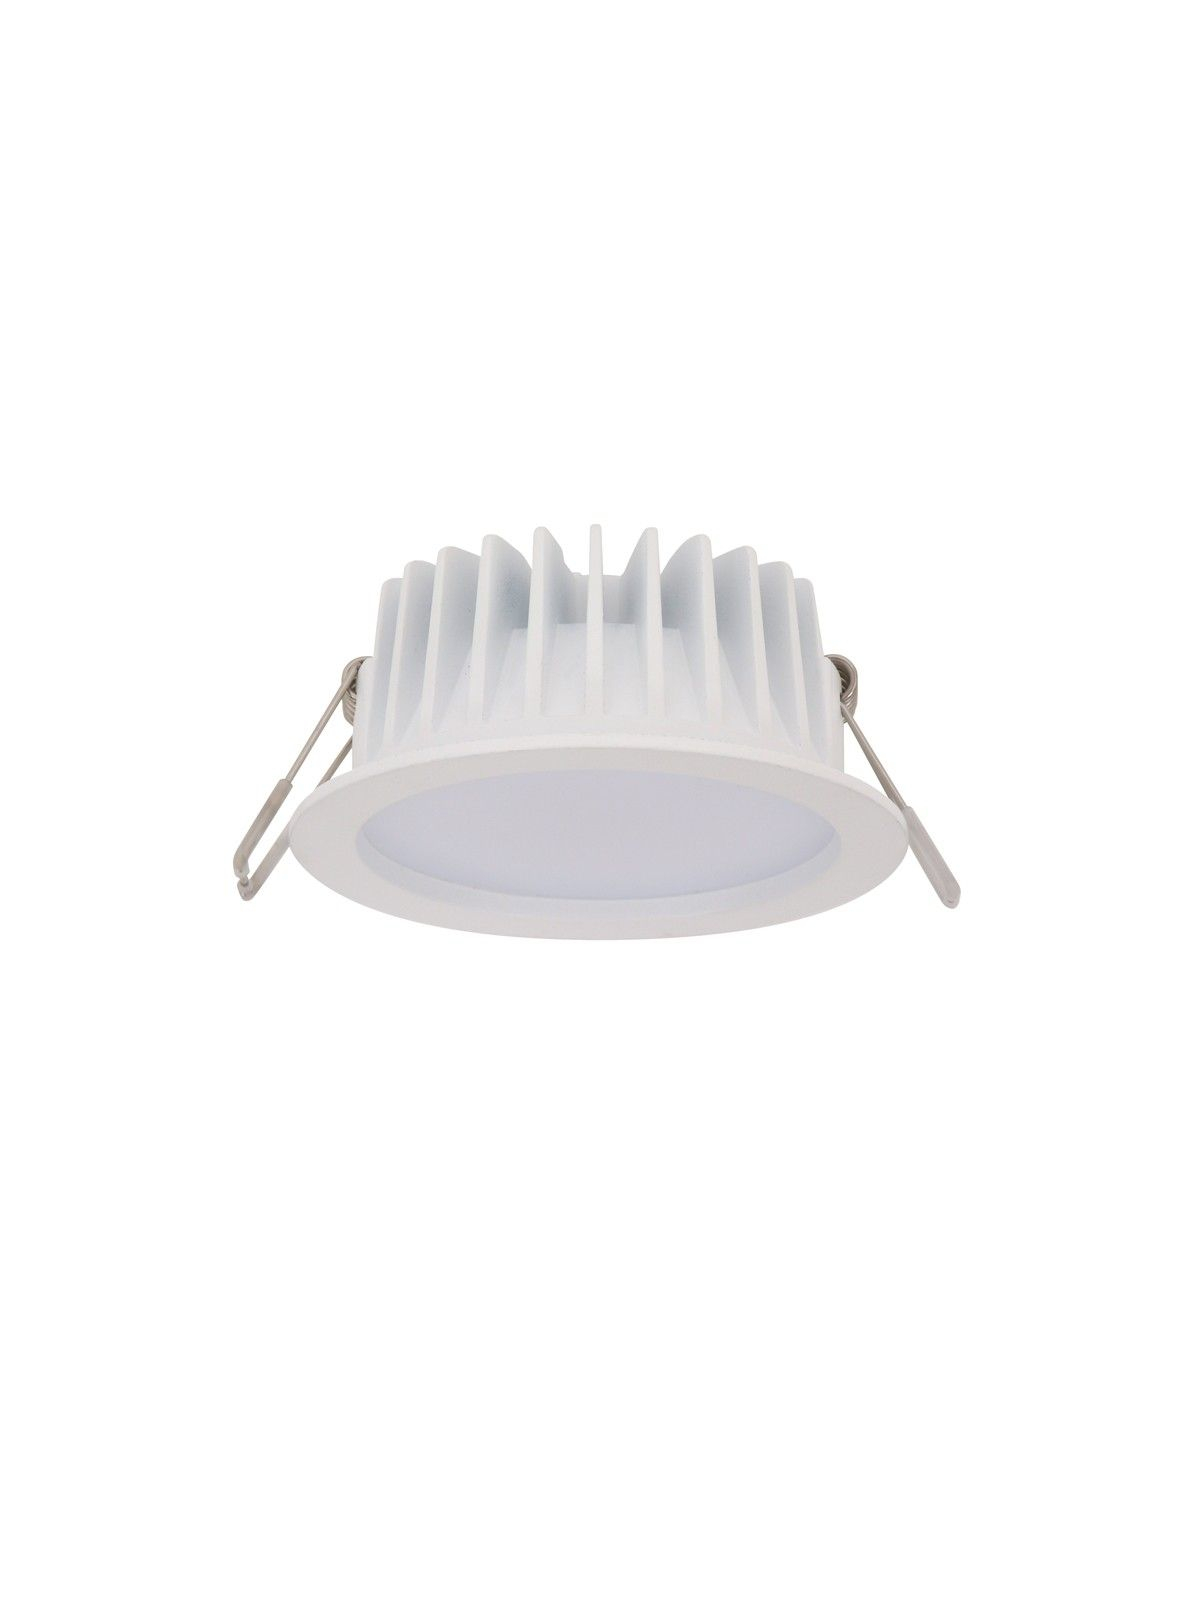 Ledlux Vivid Colour Switch Downlight In White Color Switch throughout size 1200 X 1600